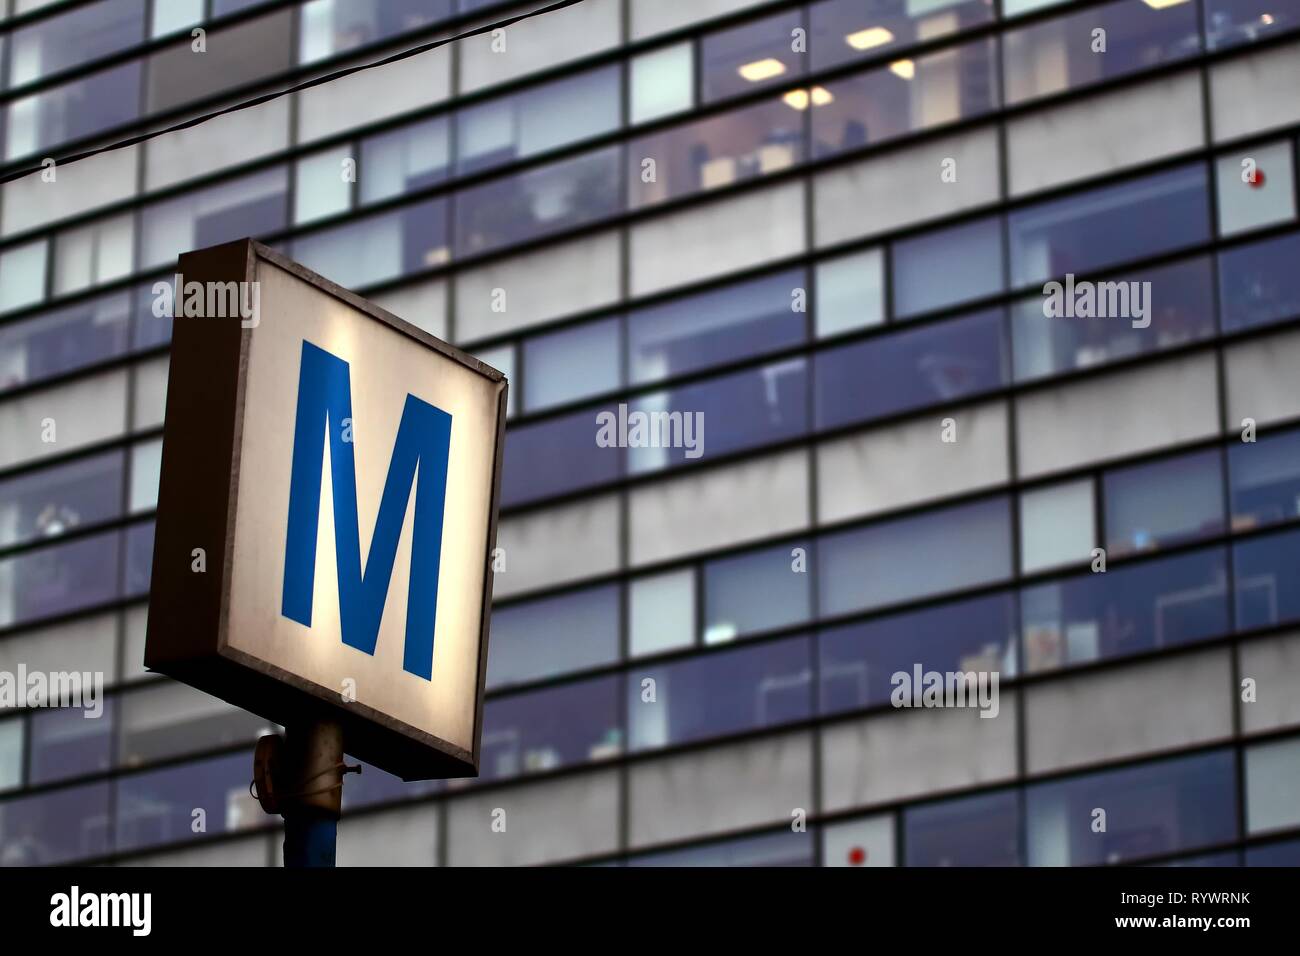 Bucharest, Romania - November 06, 2018: The symbol of a subway station is seen in front of a large office building in Bucharest, Romania. This image i Stock Photo